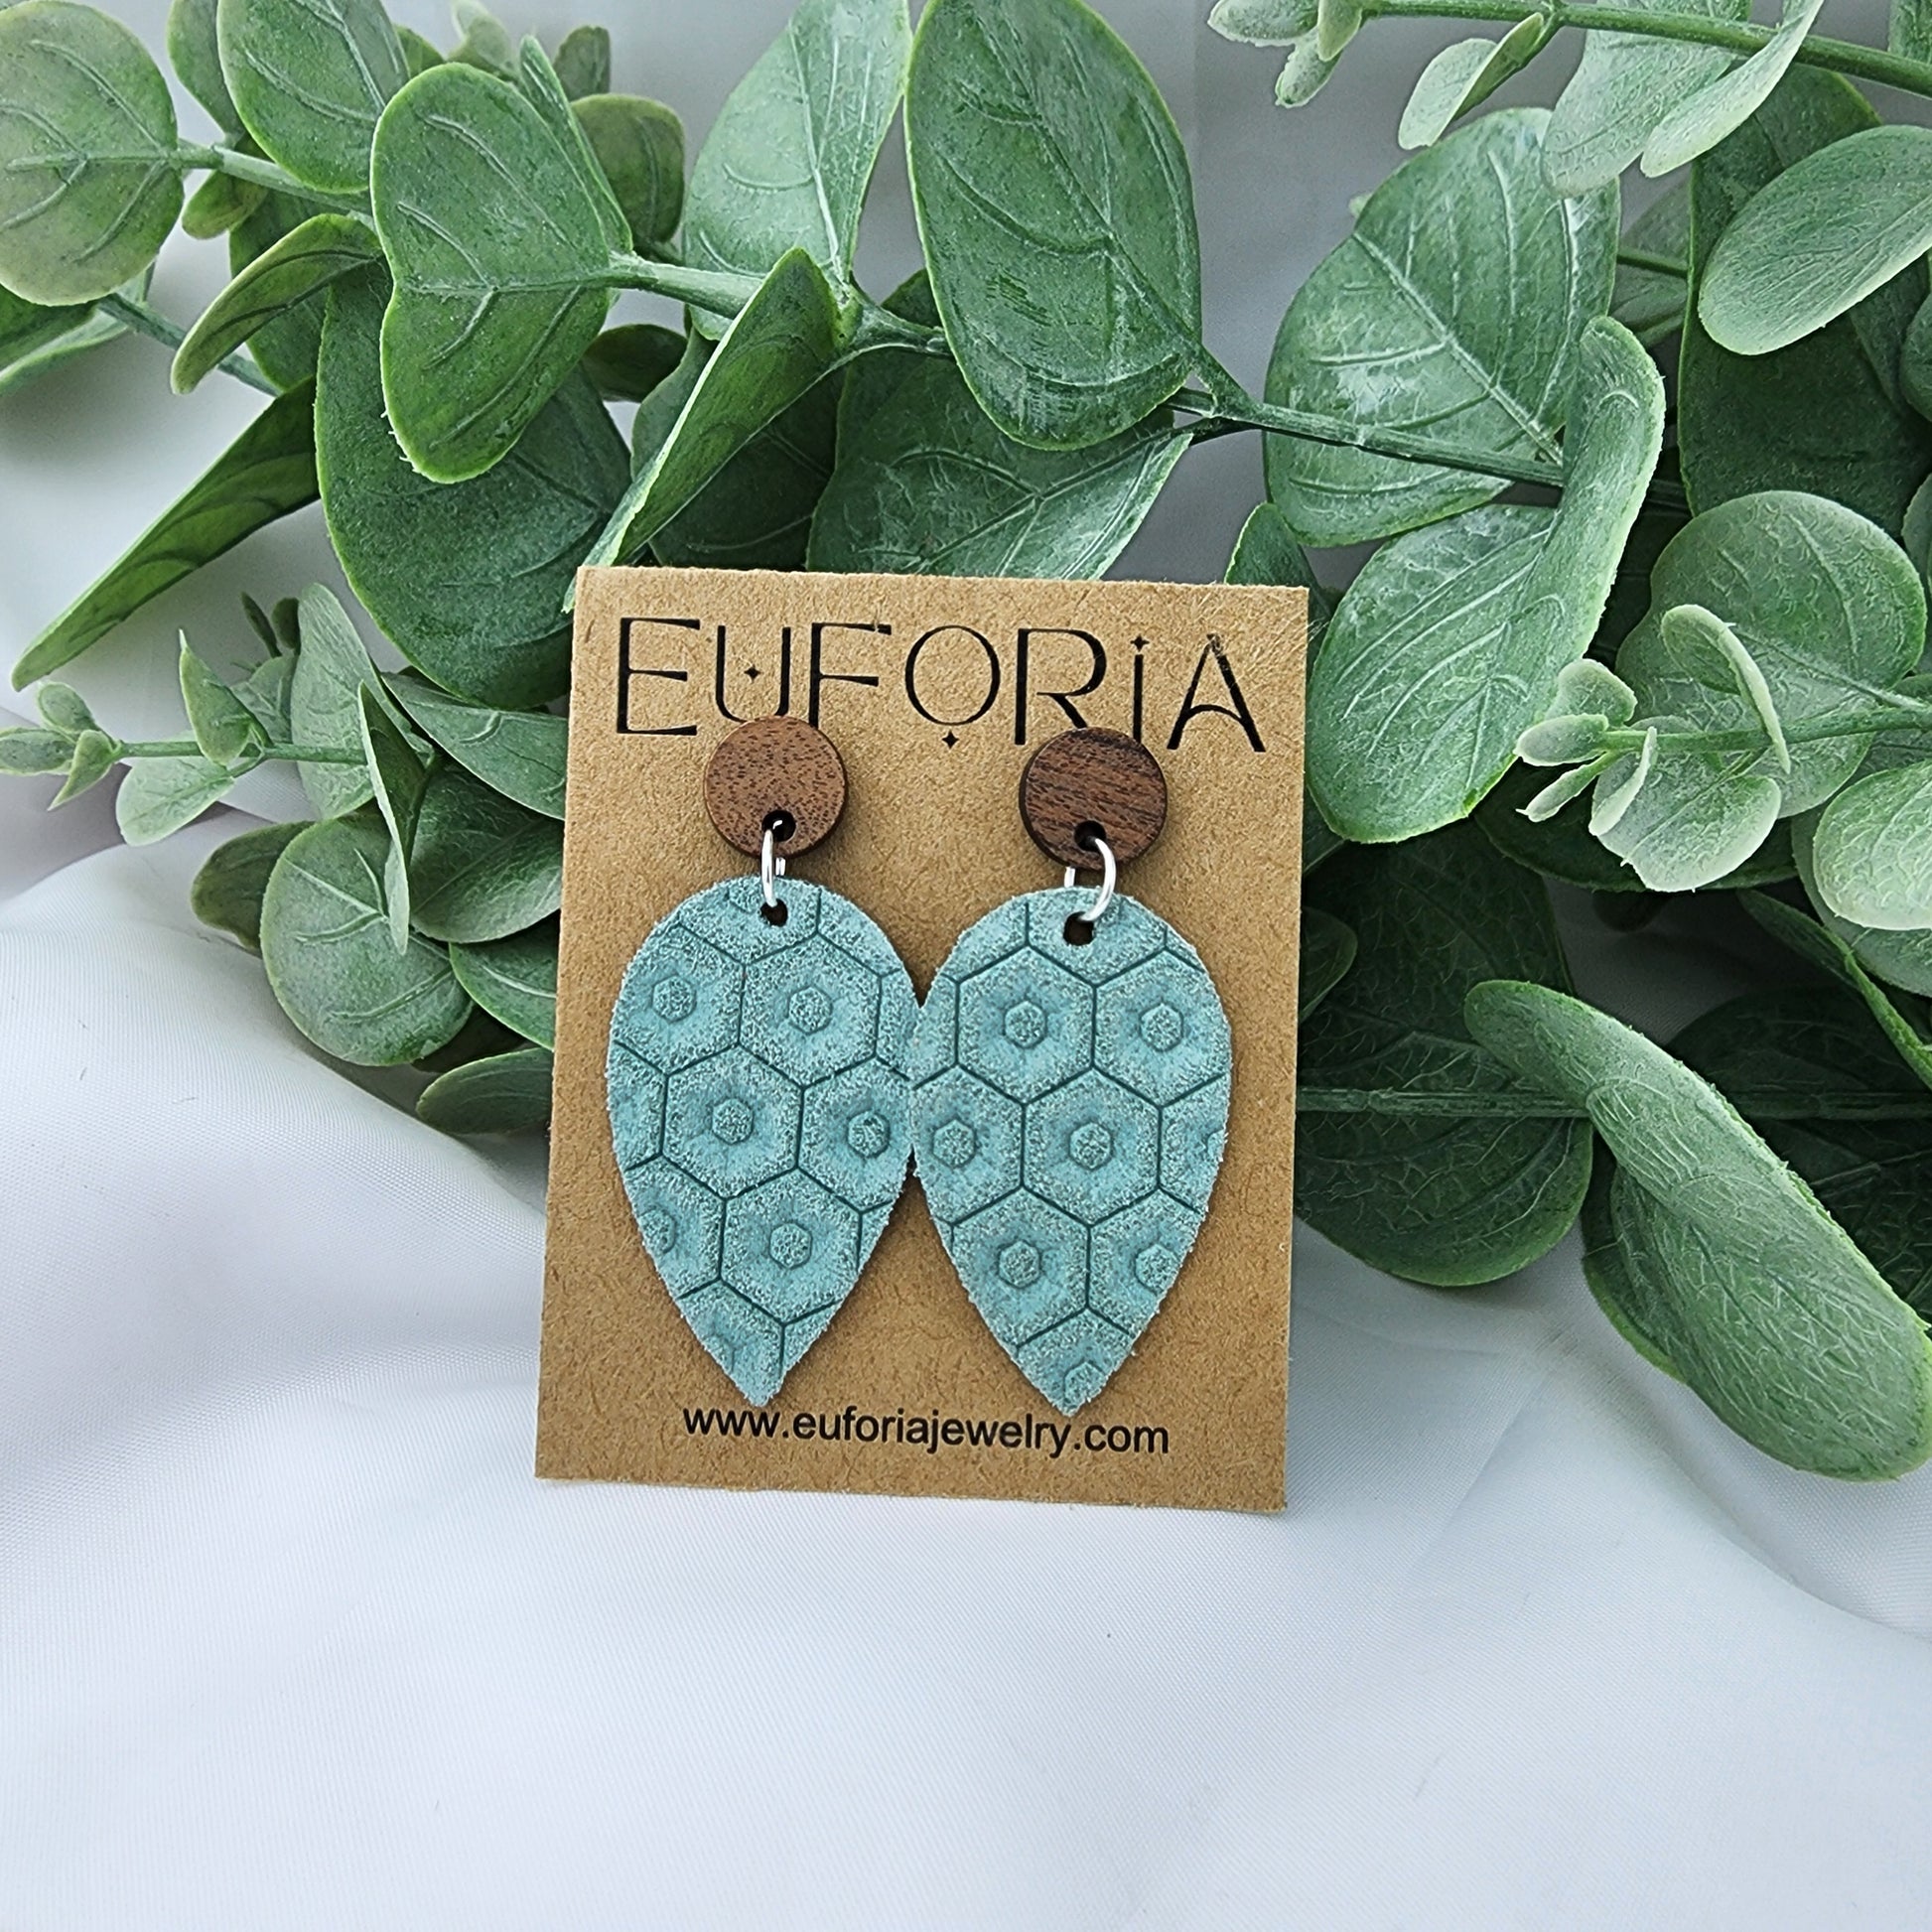 Leather teardrop earrings with round wood post.  Seafoam green with beehive texture.